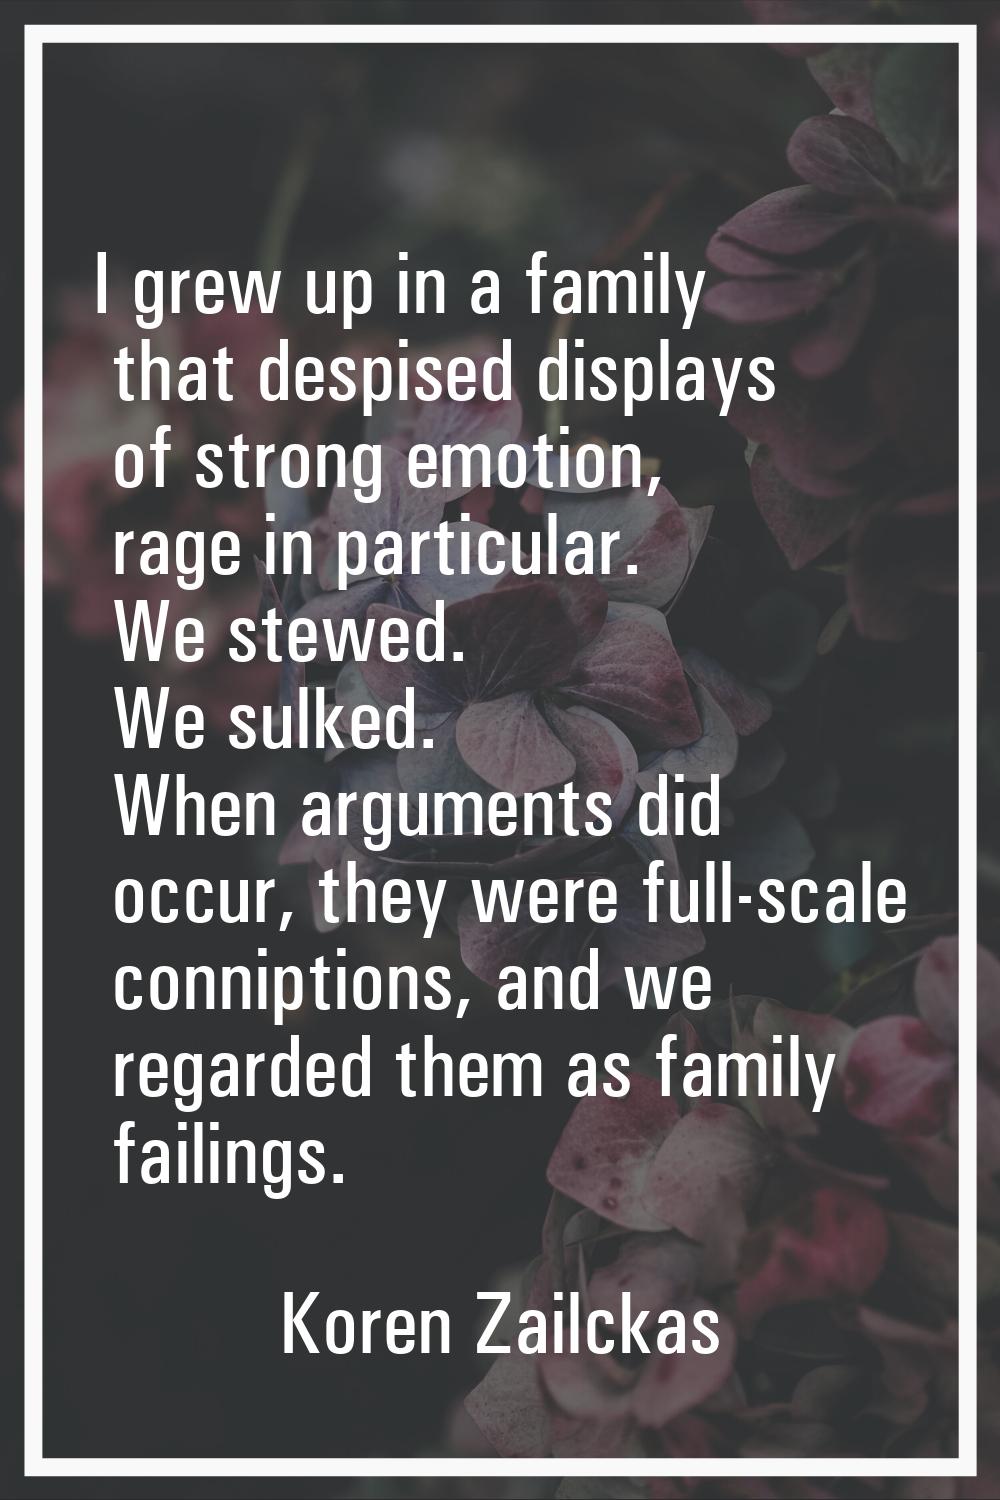 I grew up in a family that despised displays of strong emotion, rage in particular. We stewed. We s